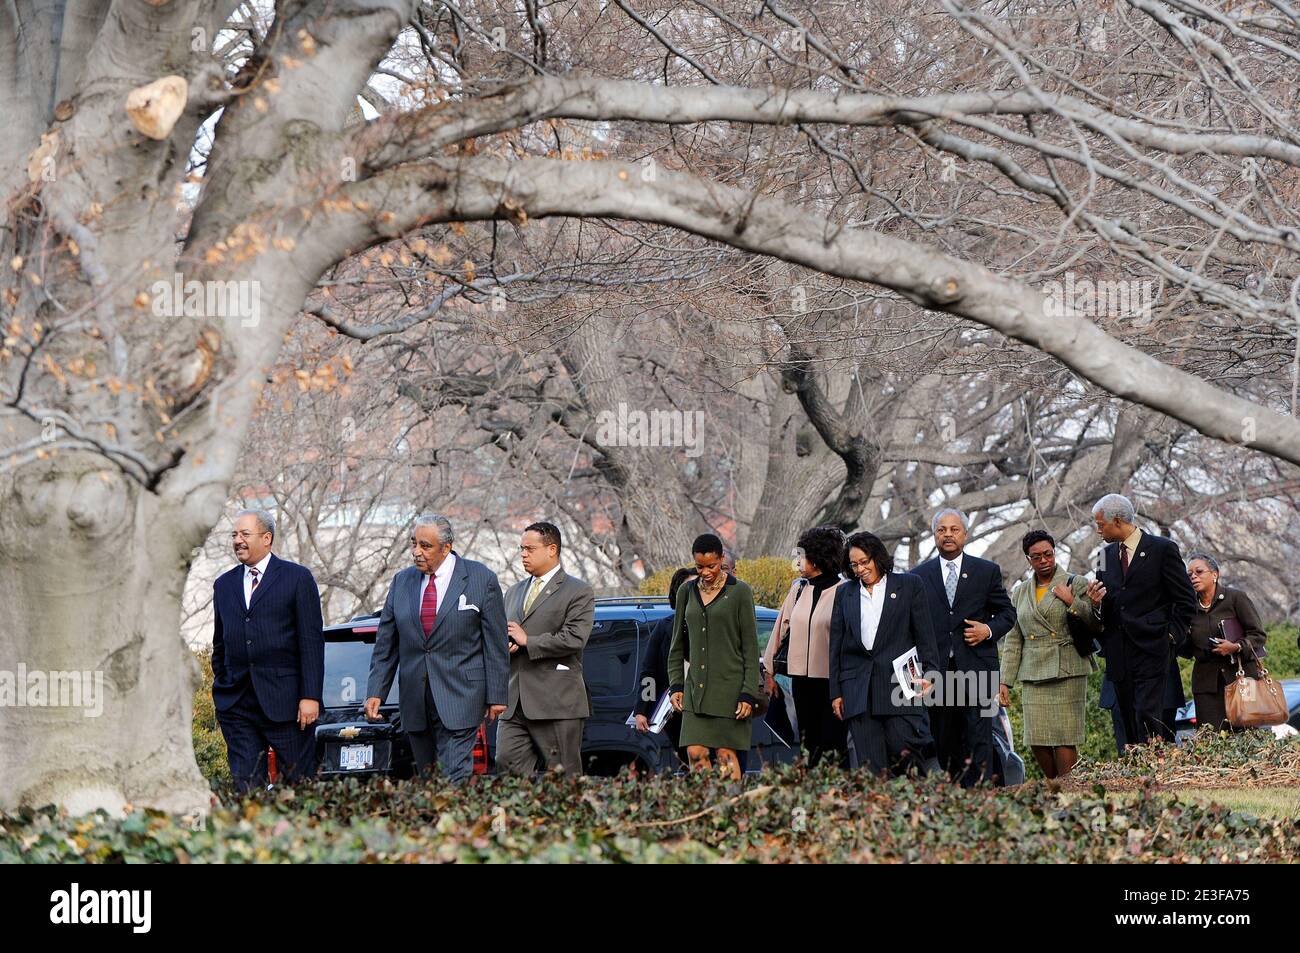 Congressional Black Caucus leaves the White House after meeting with President Obama for the first time in Washington, DC, February 26, 2009. Photo by Olivier Douliery/ABACAPRESS.COM Stock Photo